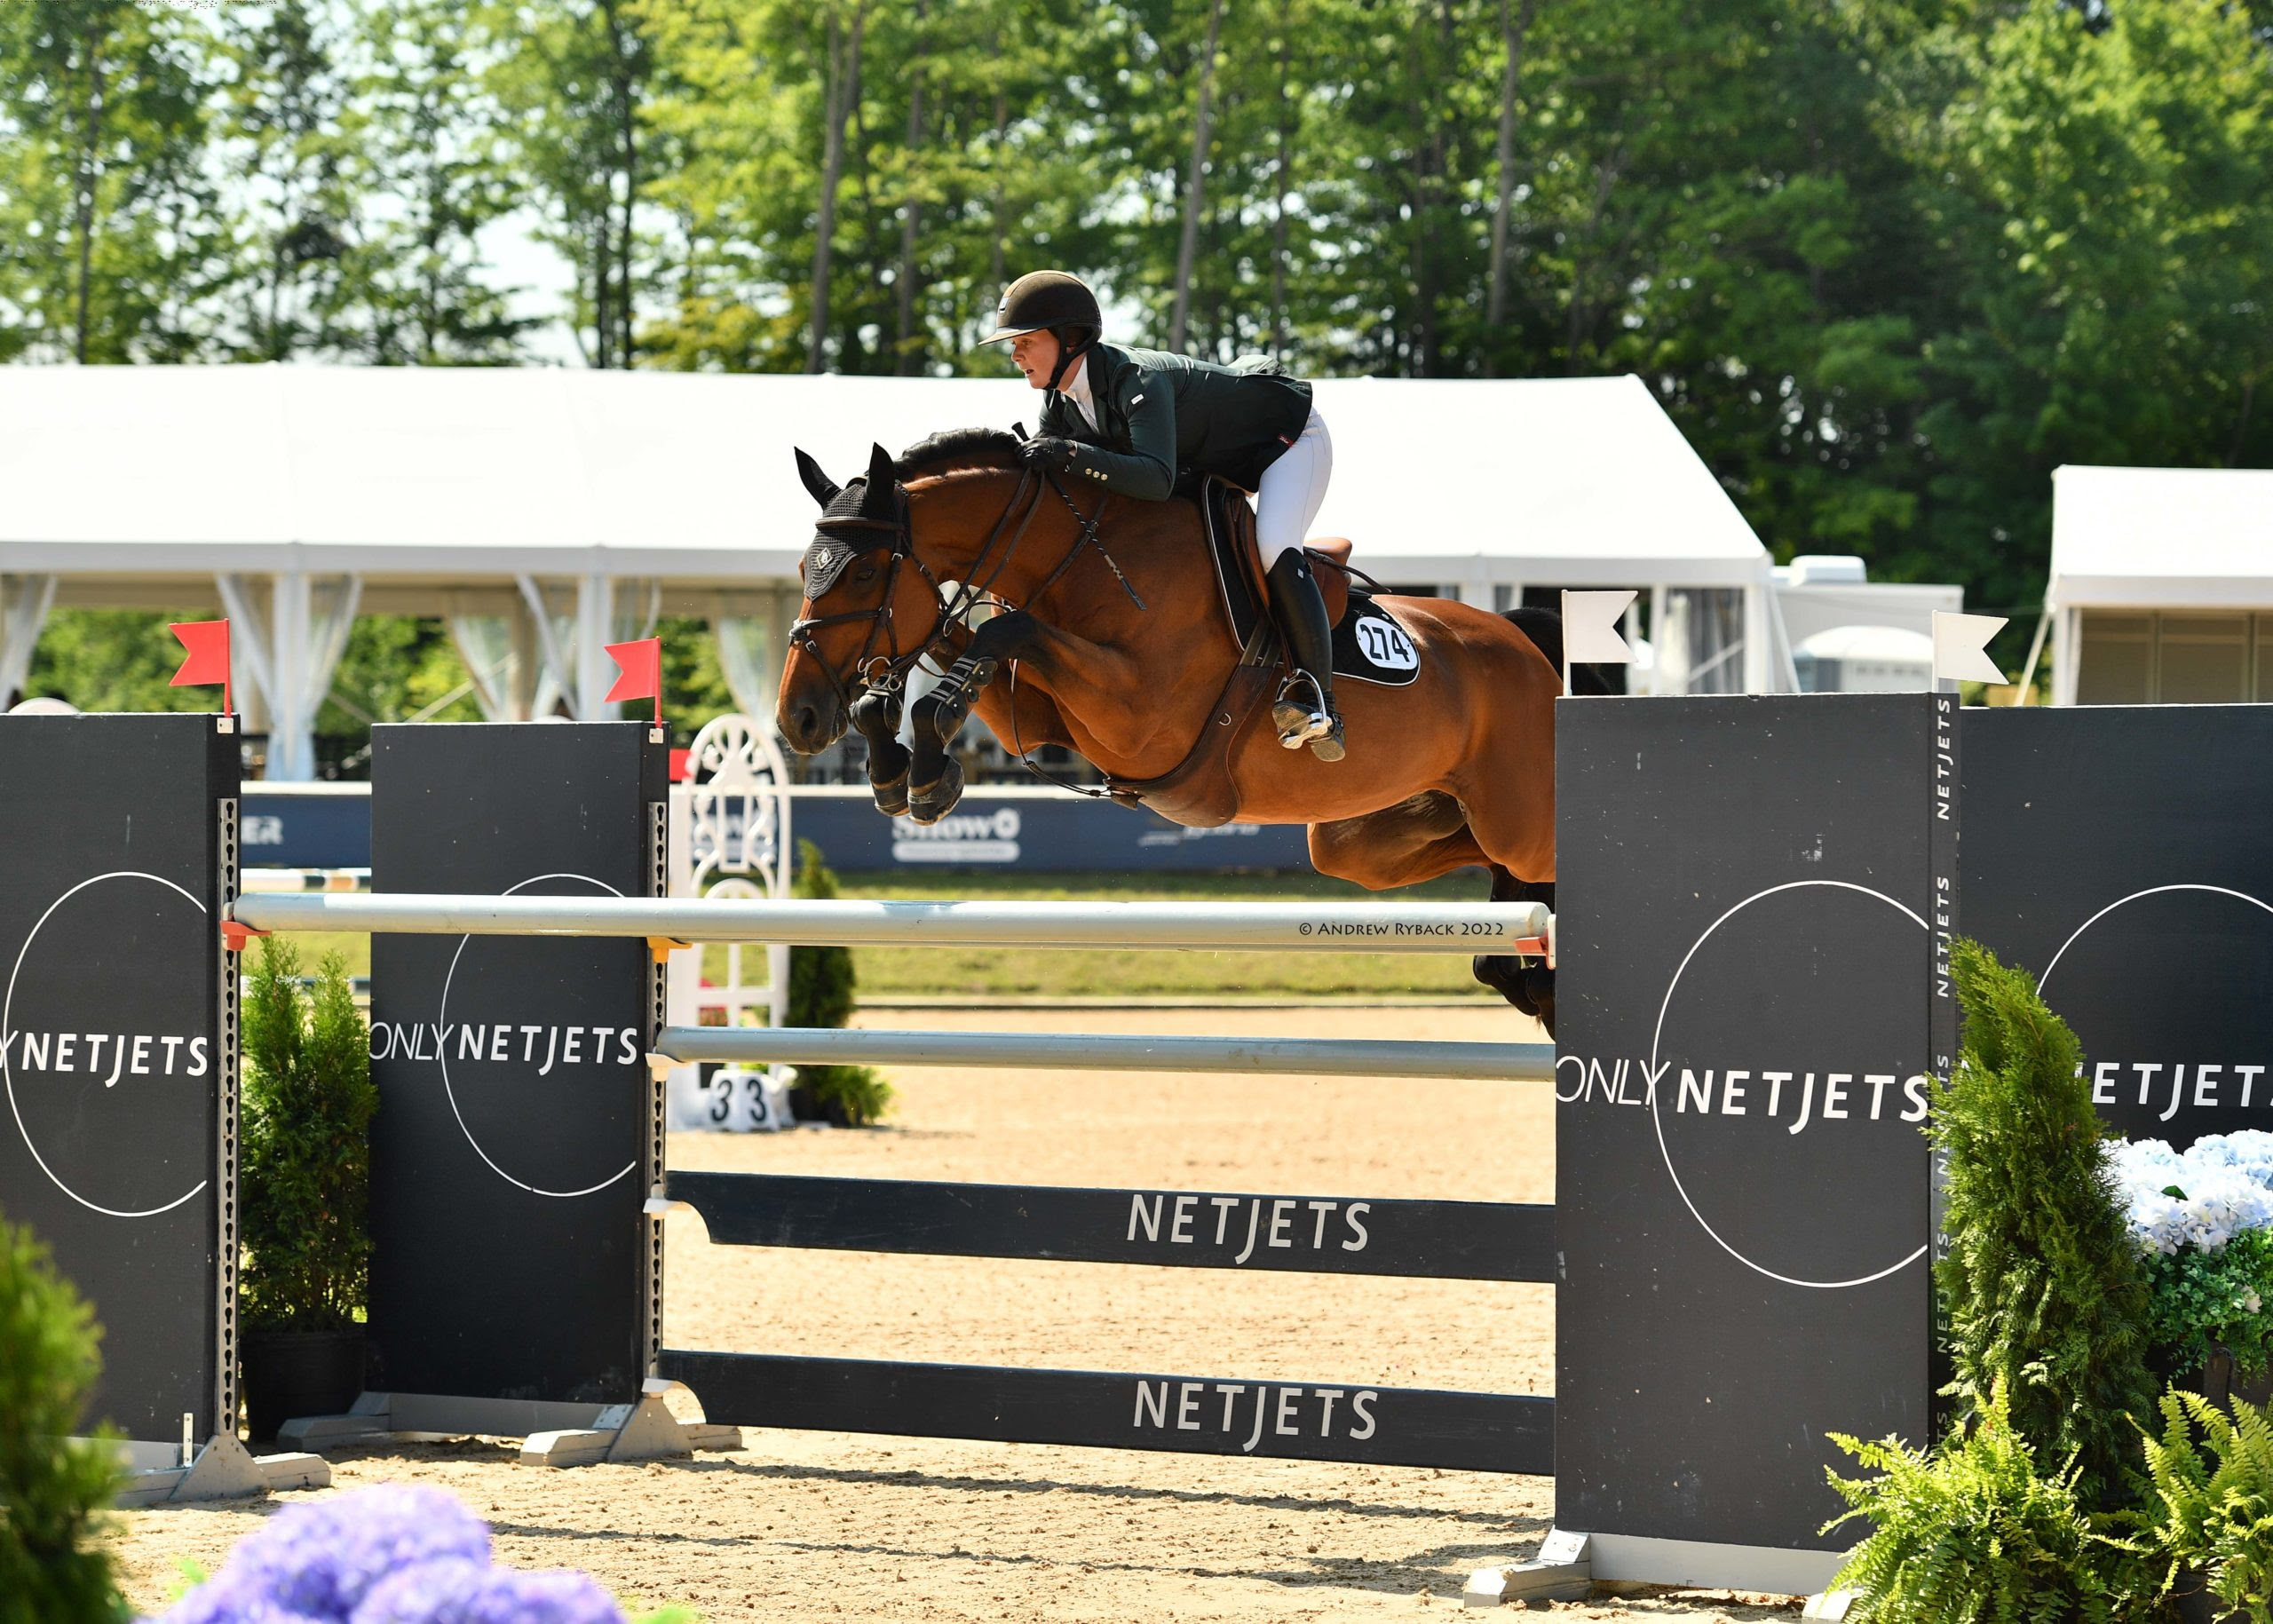 Driscoll Does It Again in $37,000 Limitless Performance CSI2* Speed Classic